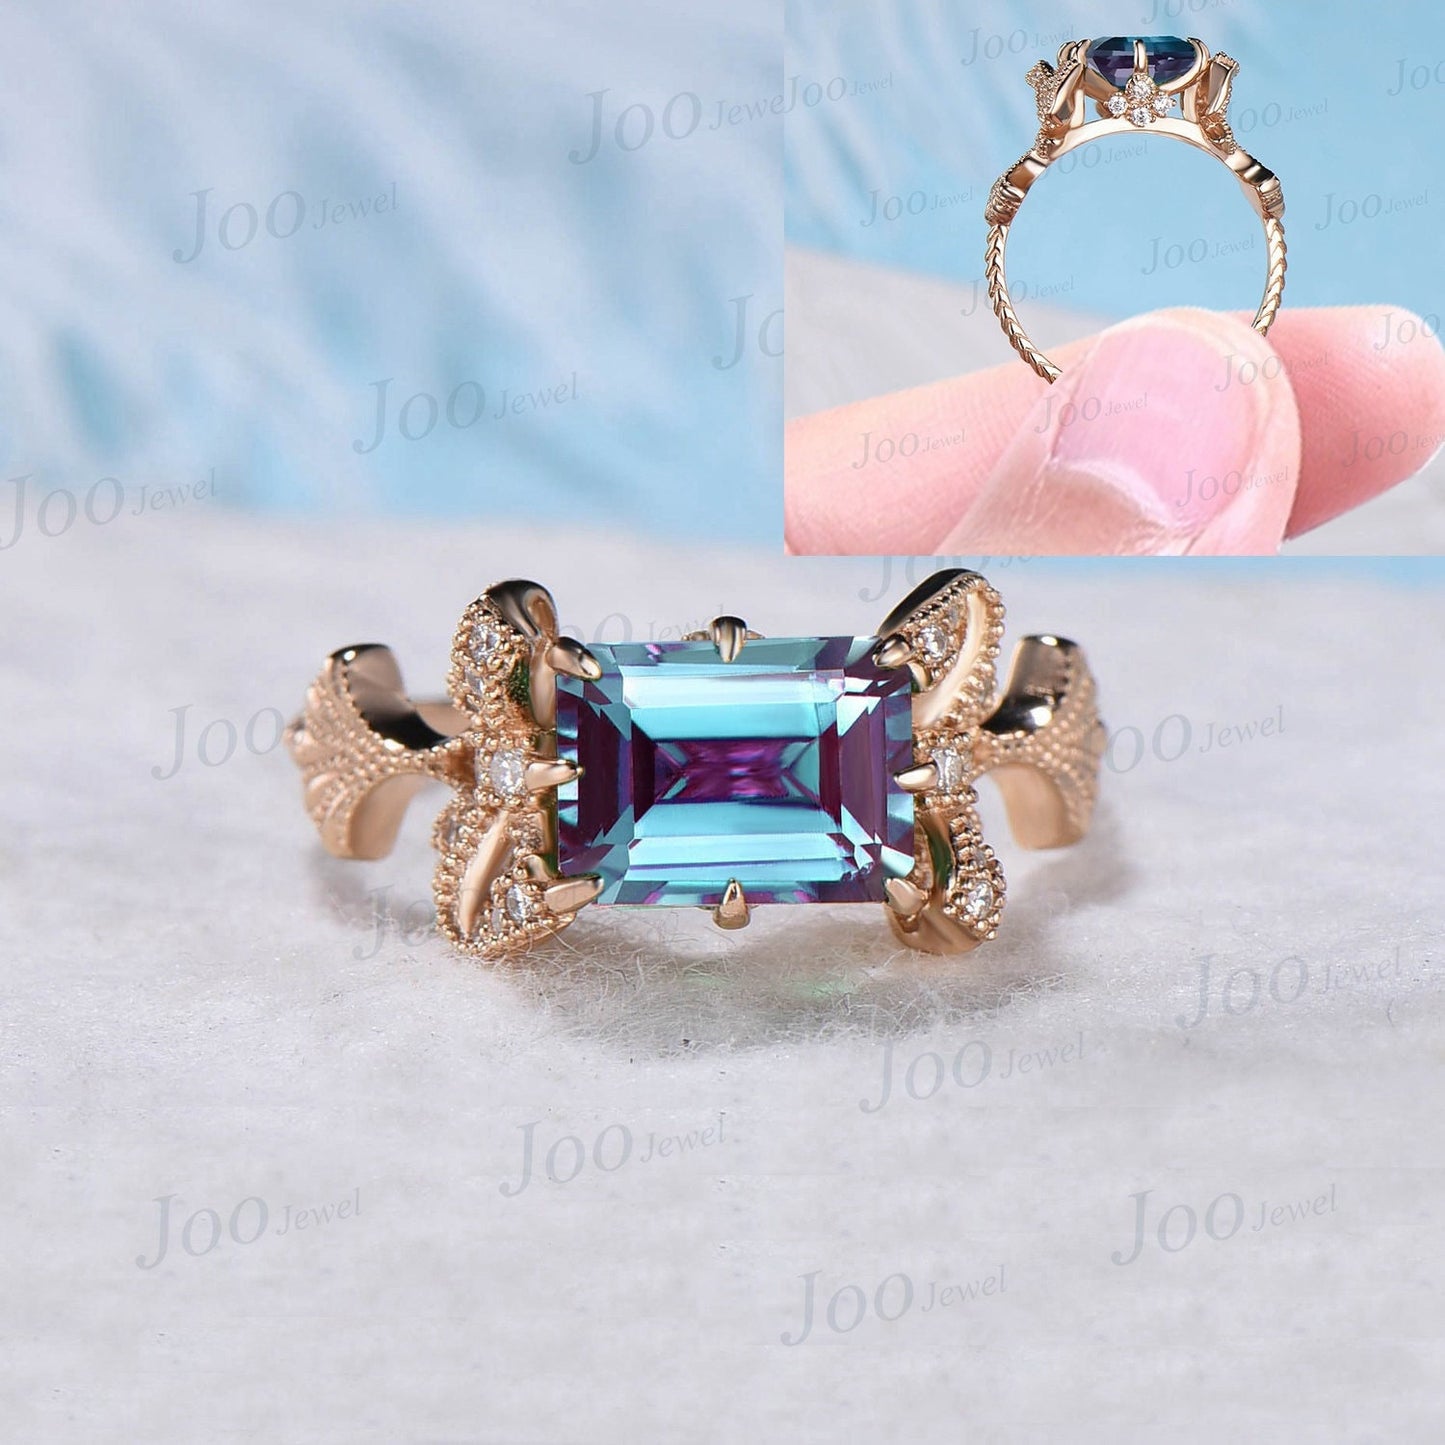 Nature Inspired 2ct Emerald Cut East West Alexandrite Engagement Ring Ginkgo Biloba Leaf Ring 10K Gold Ginkgo Jewelry Bow Tie Promise Ring